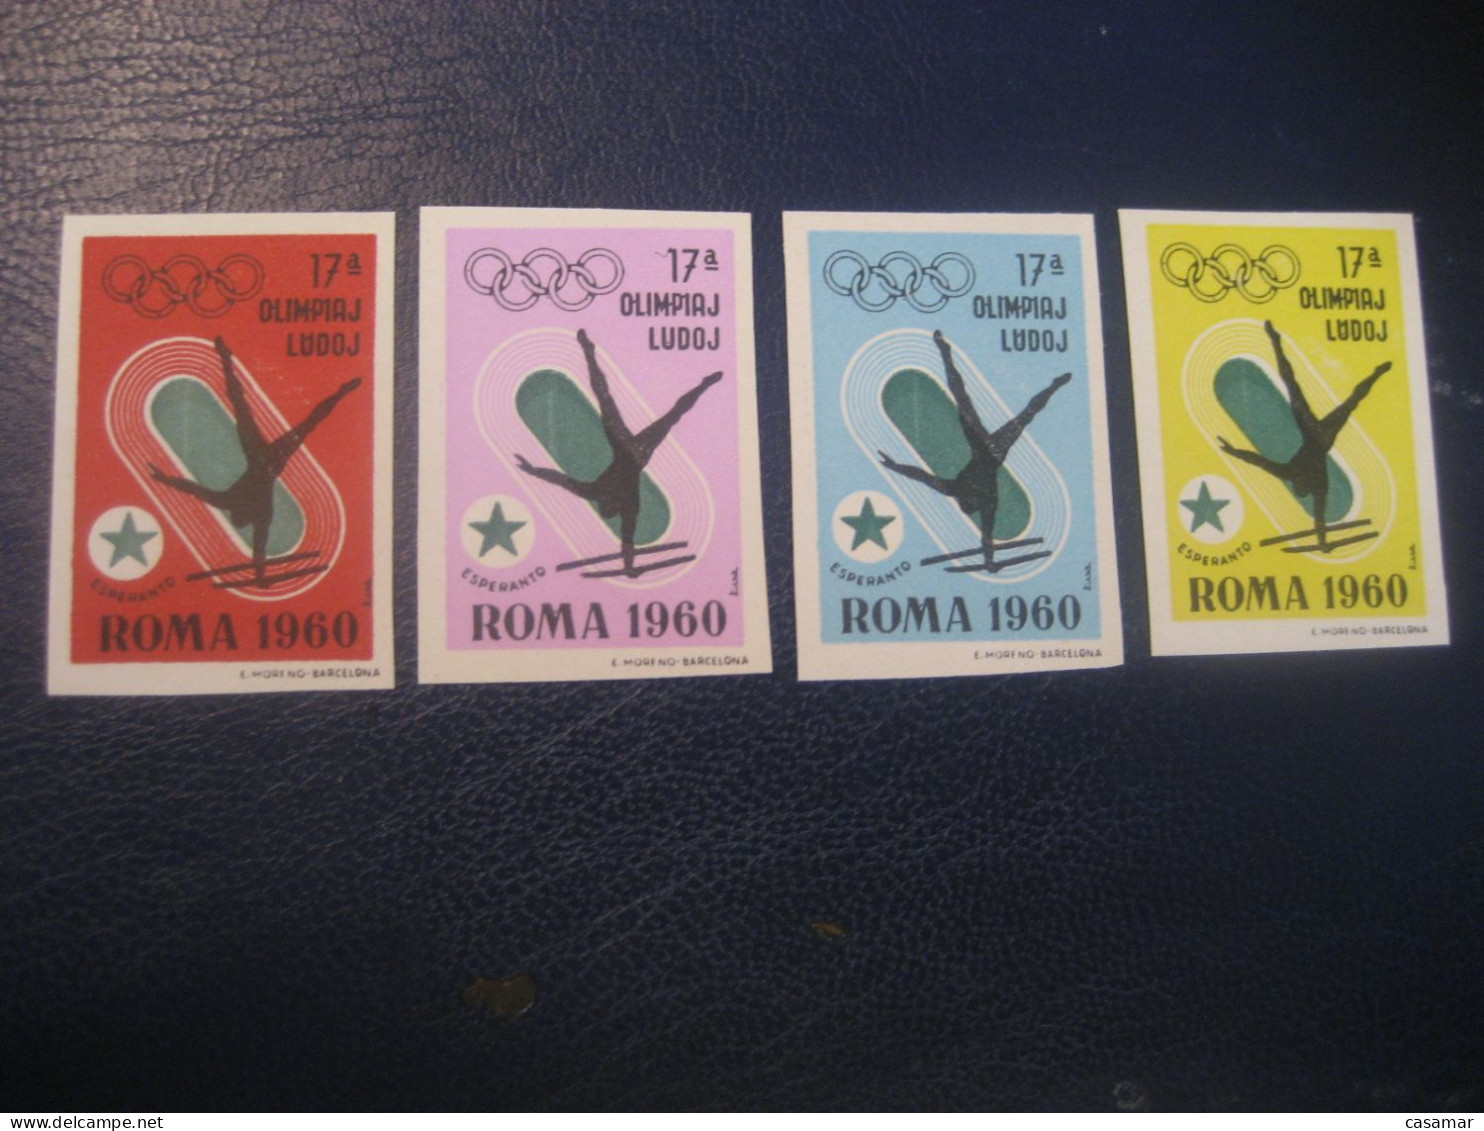 ROMA 1960 Gymnastics Gymnastique Olympic Games Olympics Esperanto 4 Imperforated Poster Stamp Vignette ITALY Spain Label - Gymnastique